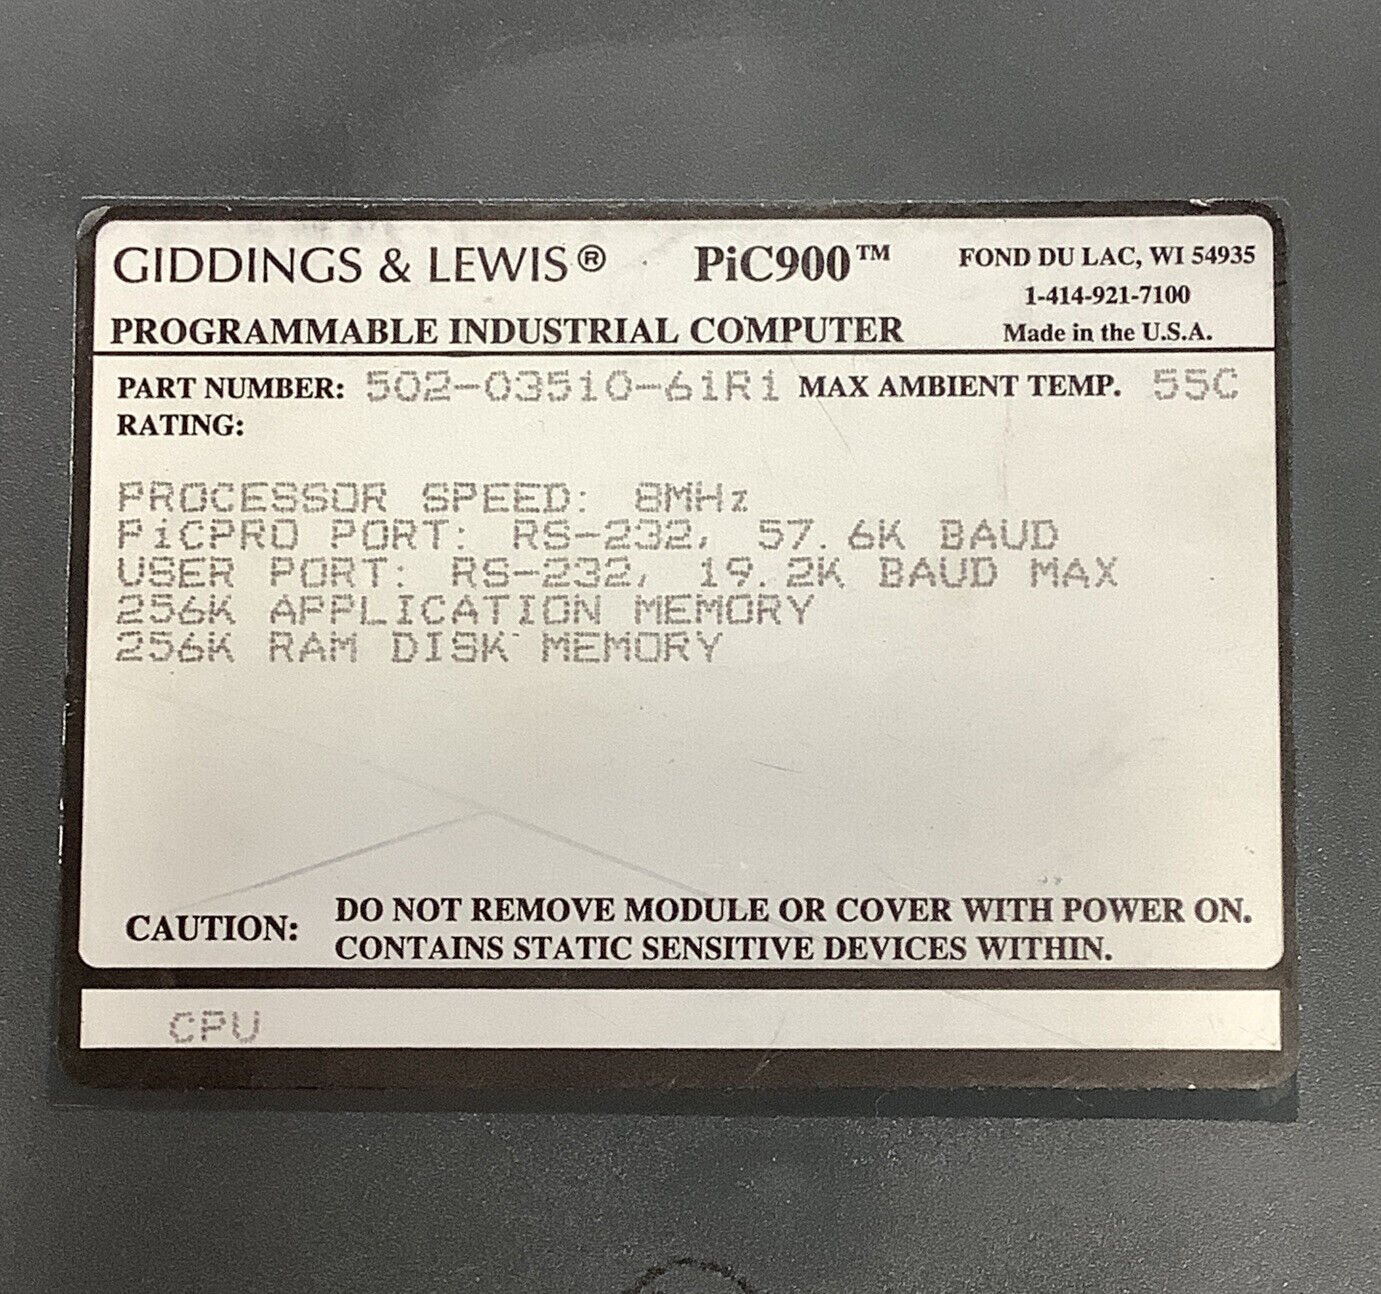 Giddings and Lewis PiC900 CPU 8Mhz 502-03510-61R1 (YE149)